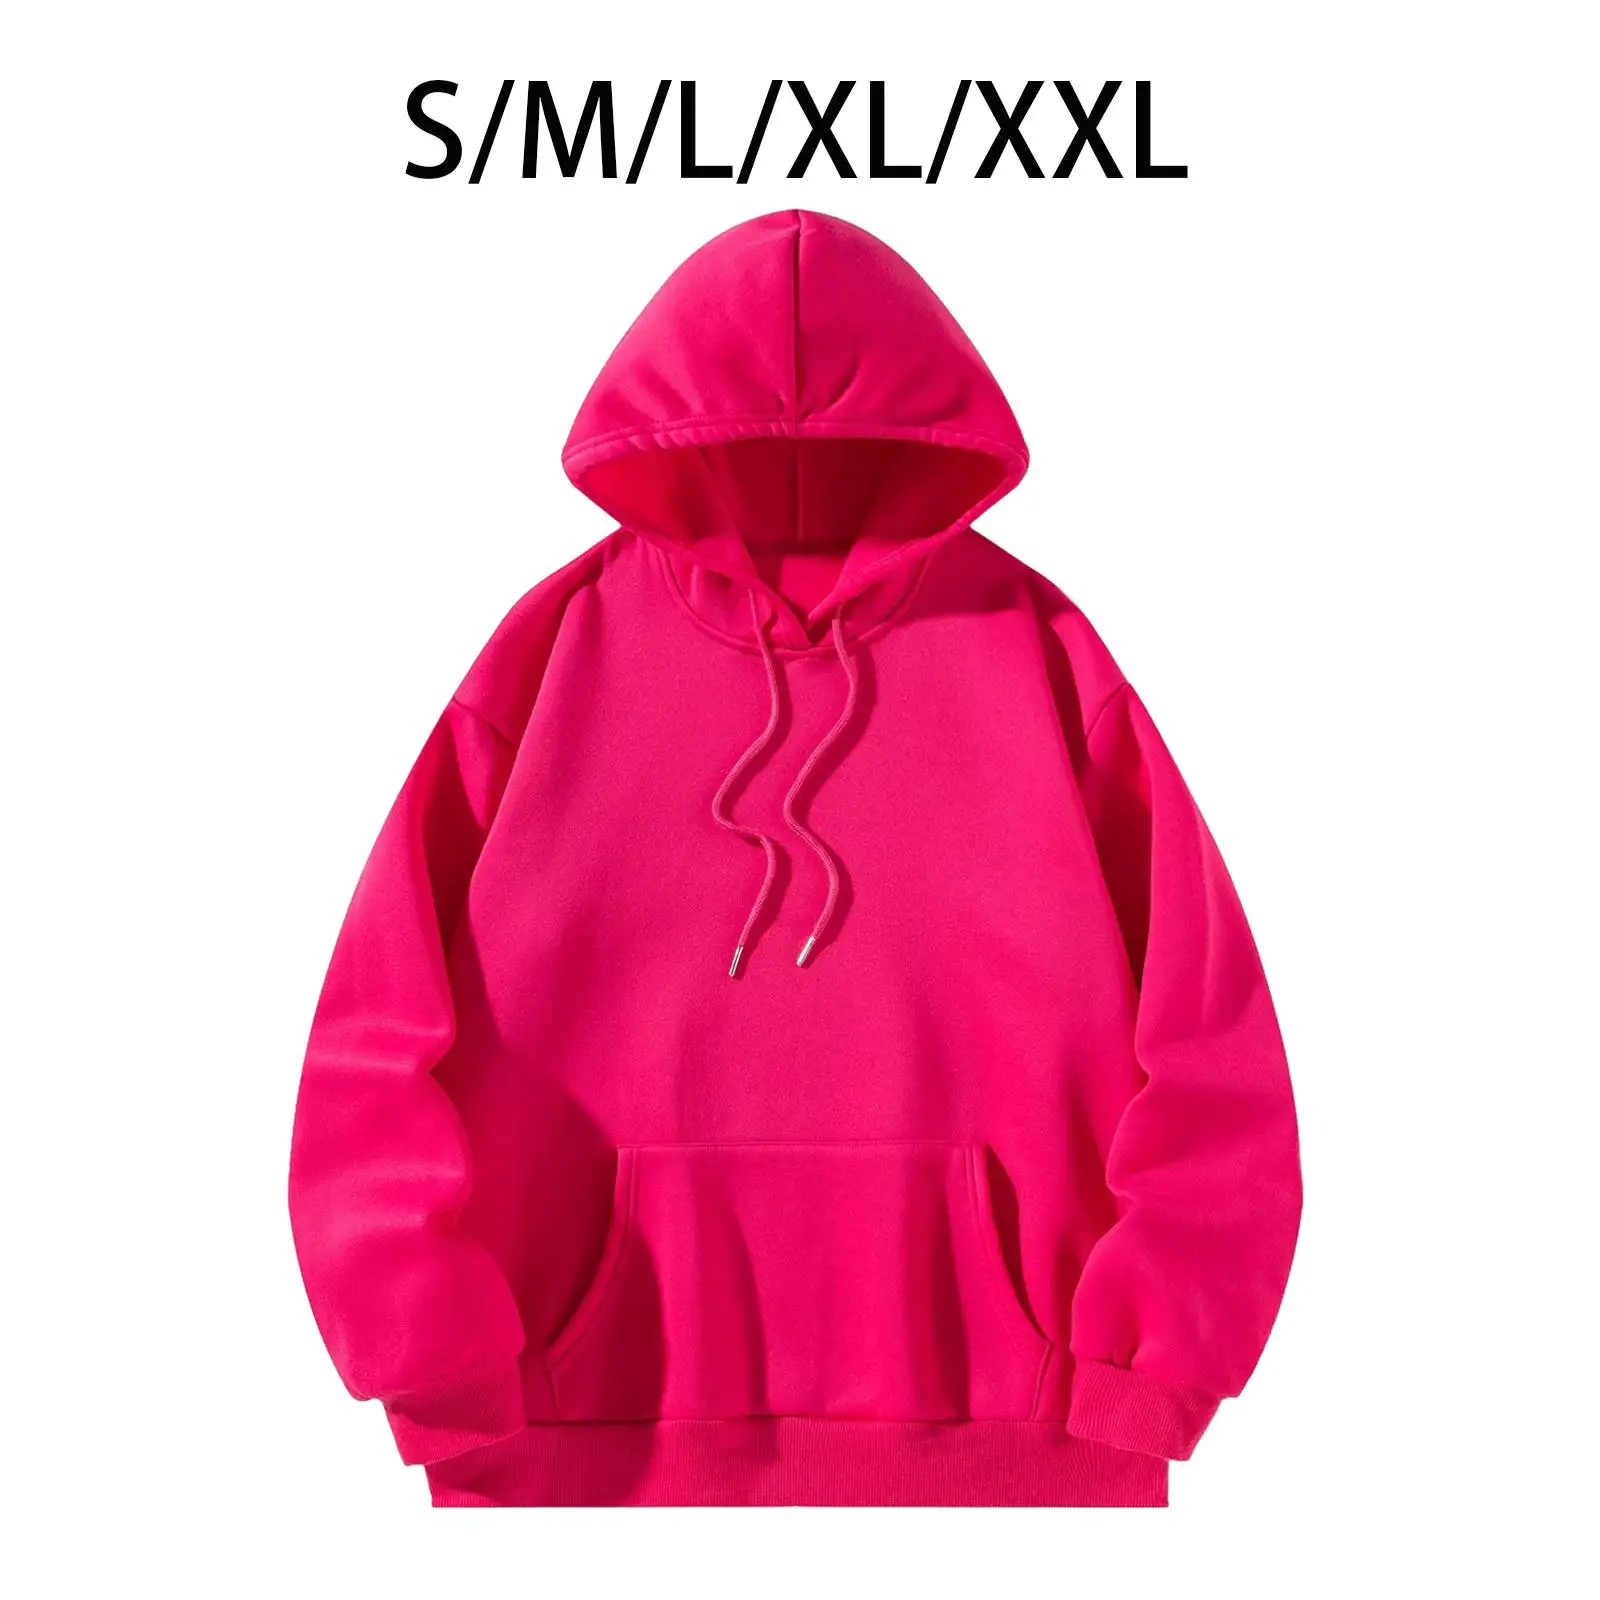 Rose Red Hooded Printed Casual Costumes Activewear Stylish Classic Long Sleeve for Work Shopping Autumn Winter Daily Wear Hiking